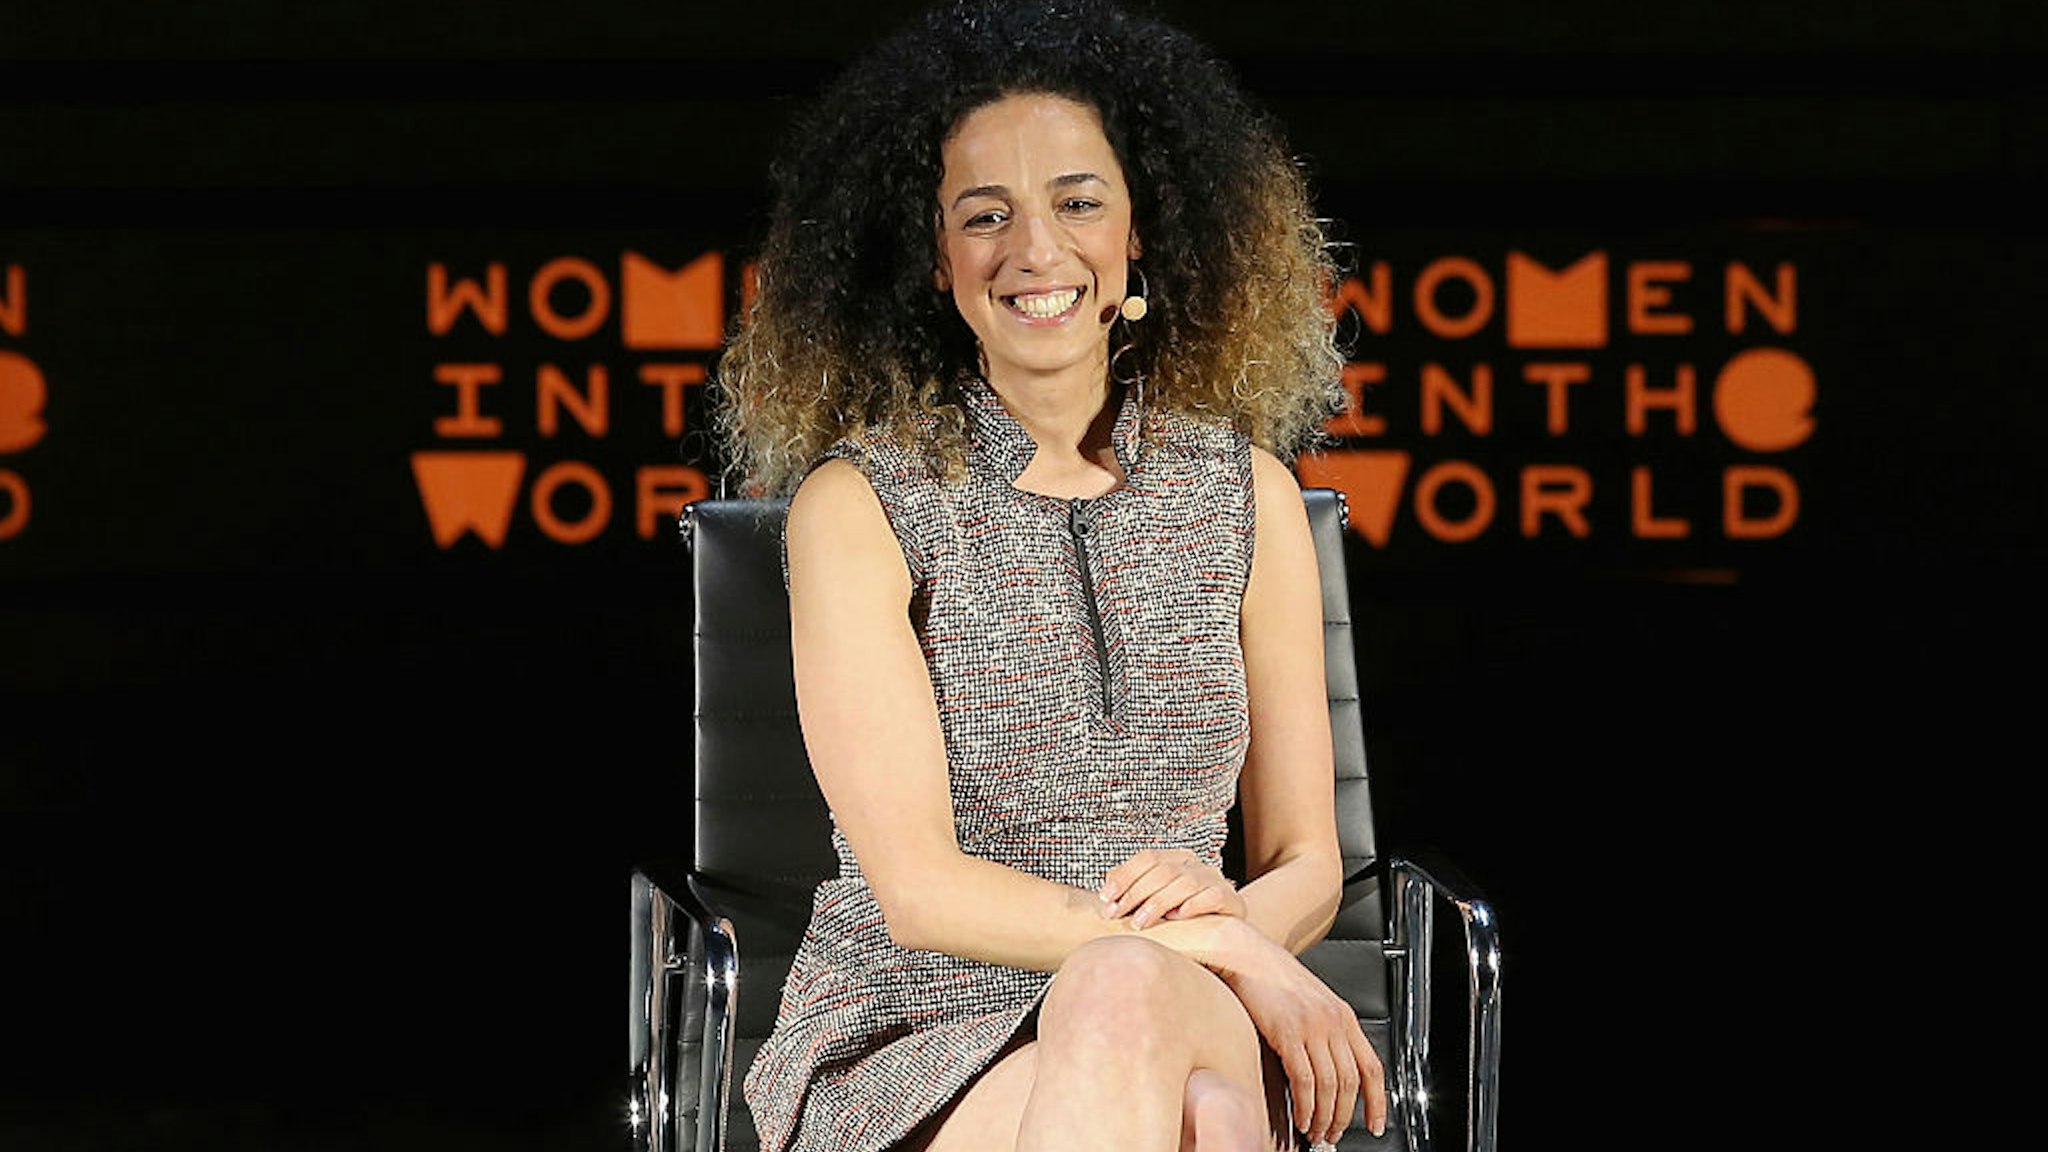 Journalist Masih Alinejad speaks onstage at My Stealthy Freedom during Tina Brown's 7th Annual Women In The World Summit at David H. Koch Theater at Lincoln Center on April 7, 2016 in New York City.